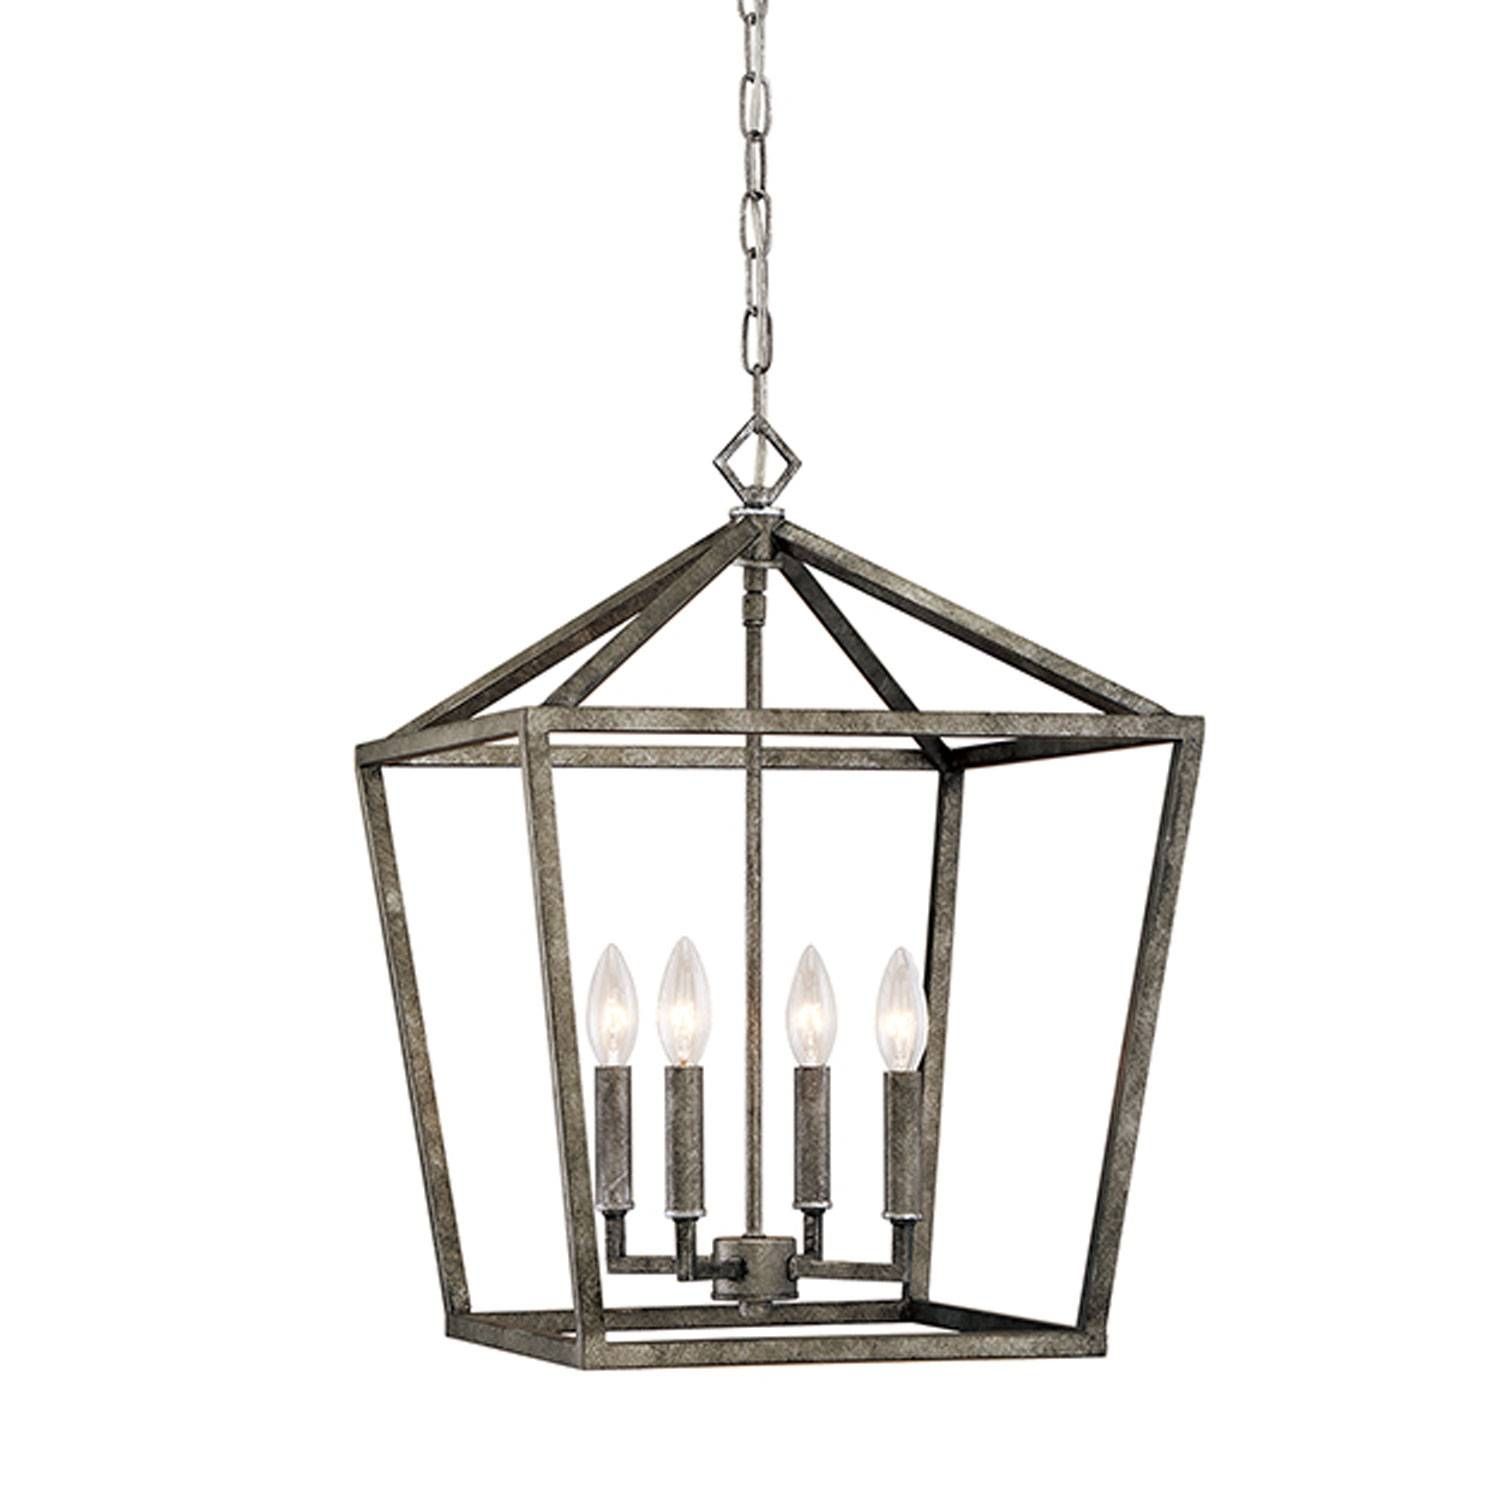 Bellacor Lantern Pendant Lighting Adds A Cheery Glow To Any Room For Lantern Style Pendant Lights (View 6 of 15)